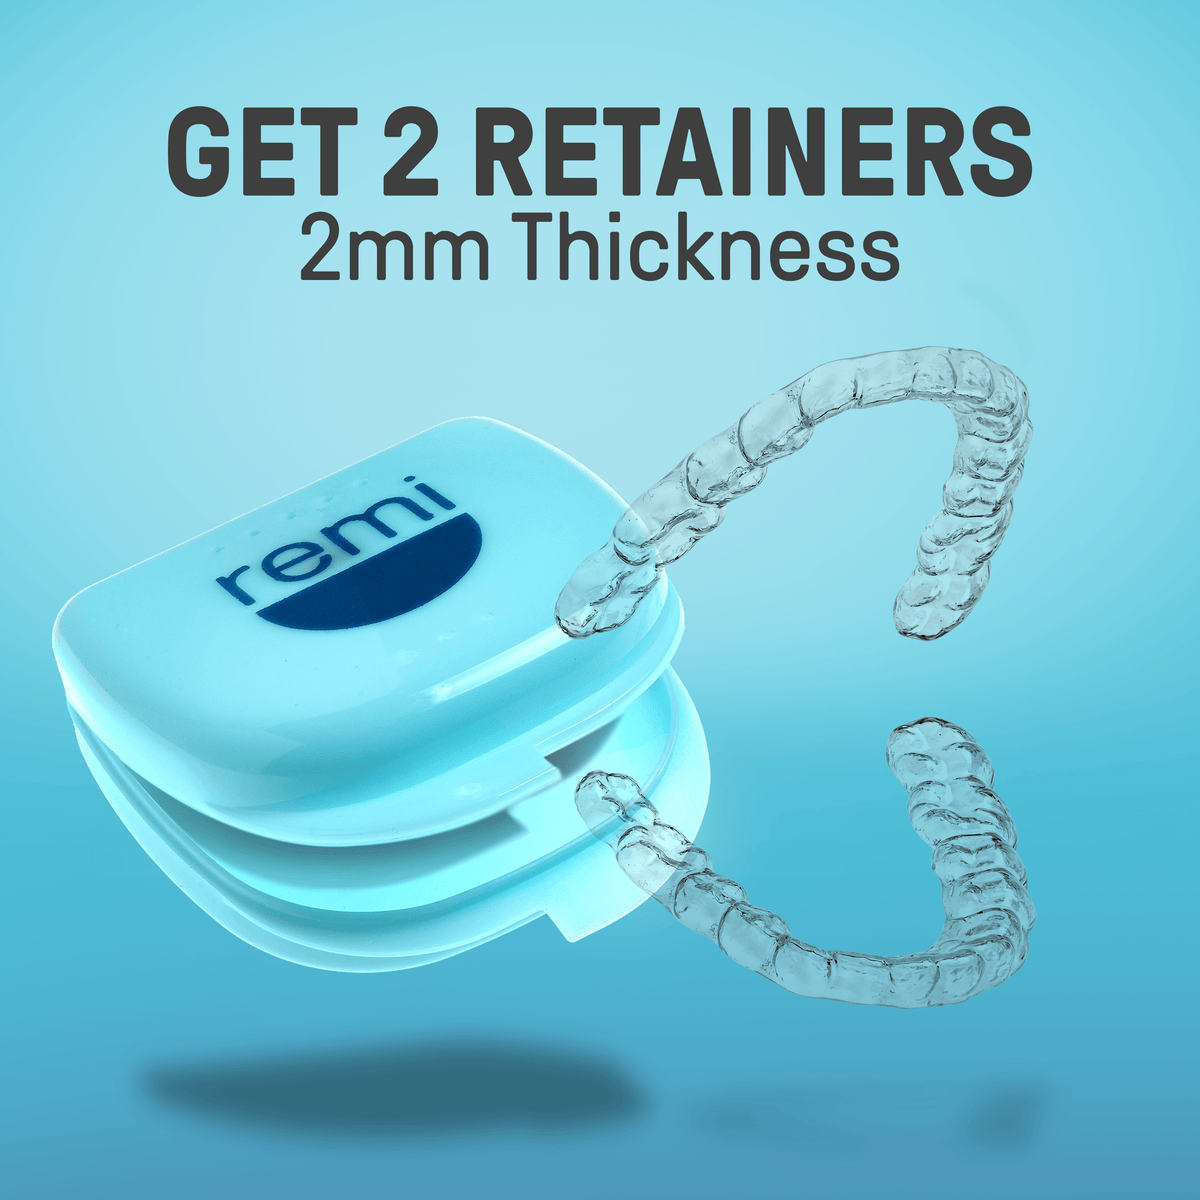 Get 2 Custom Clear Removable Retainers 2mm thickness.